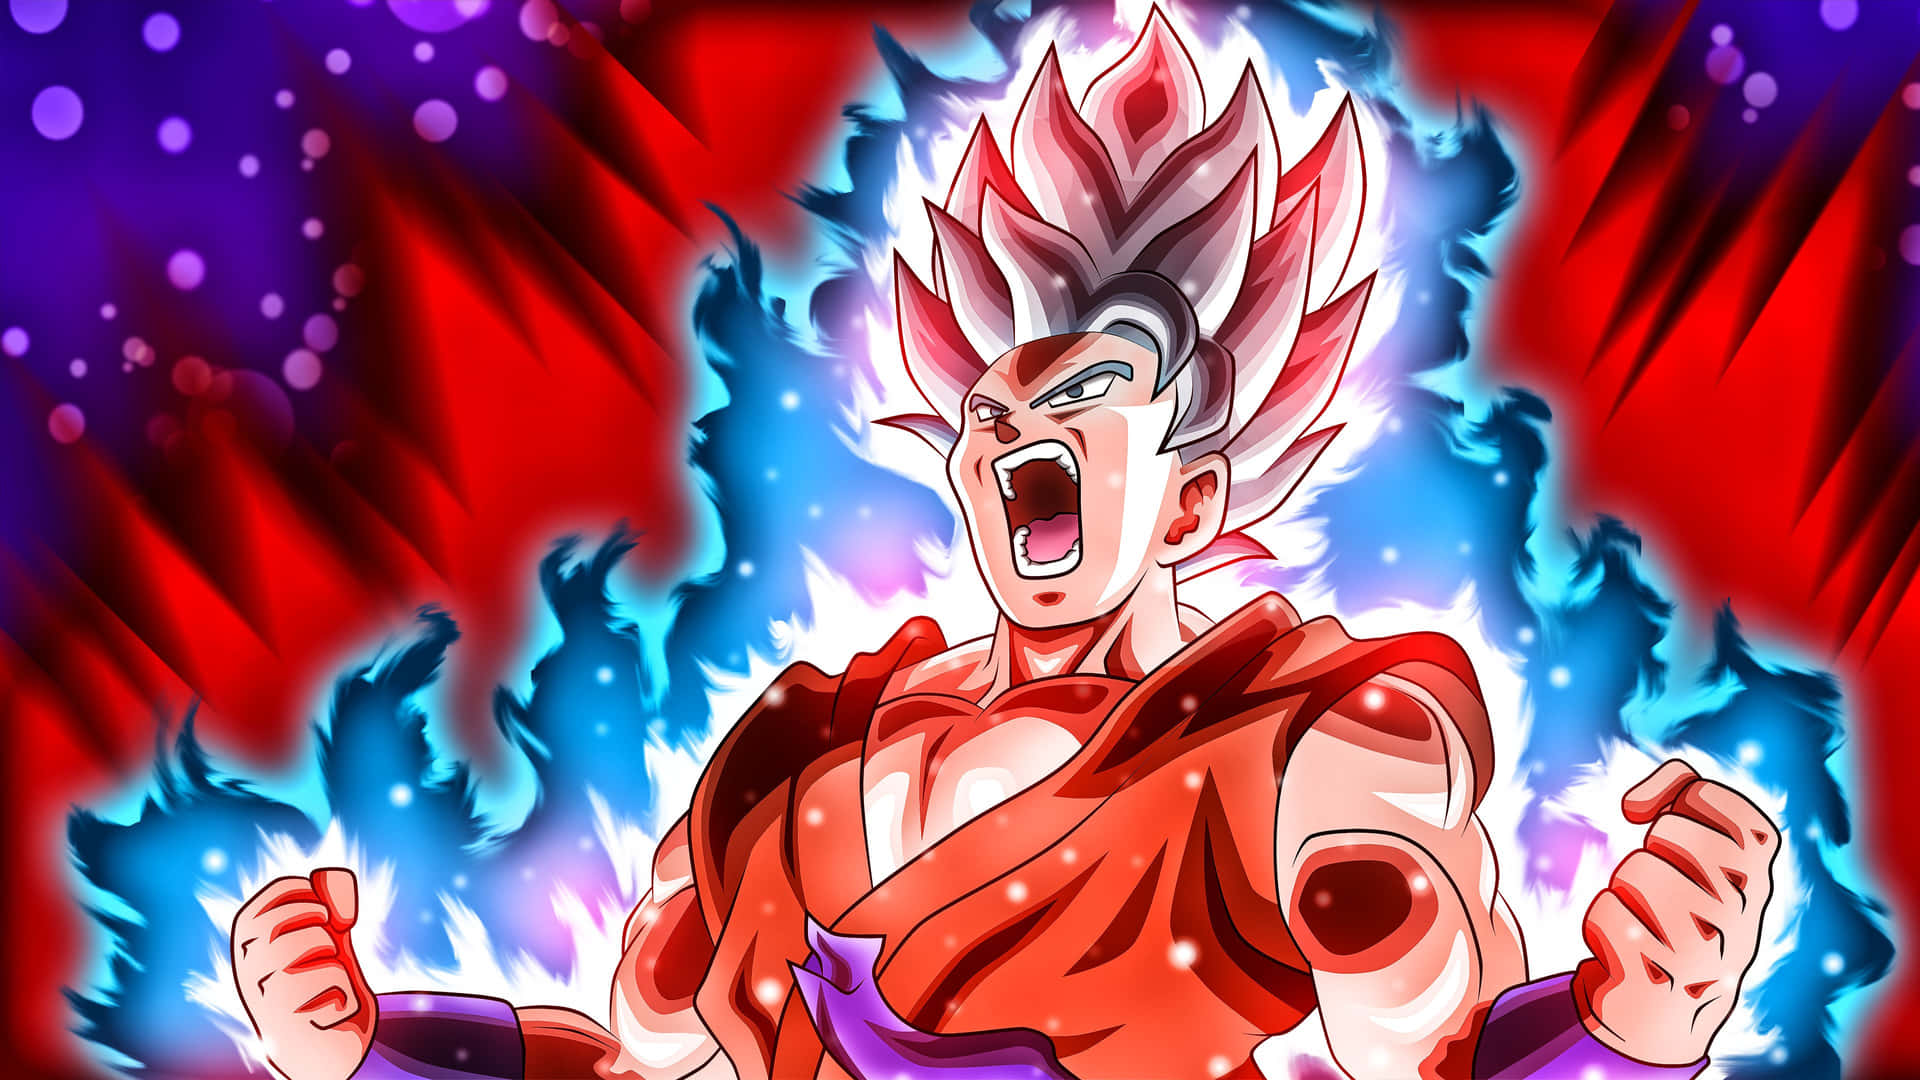 Discover the warrior race of powerful Saiyans Wallpaper